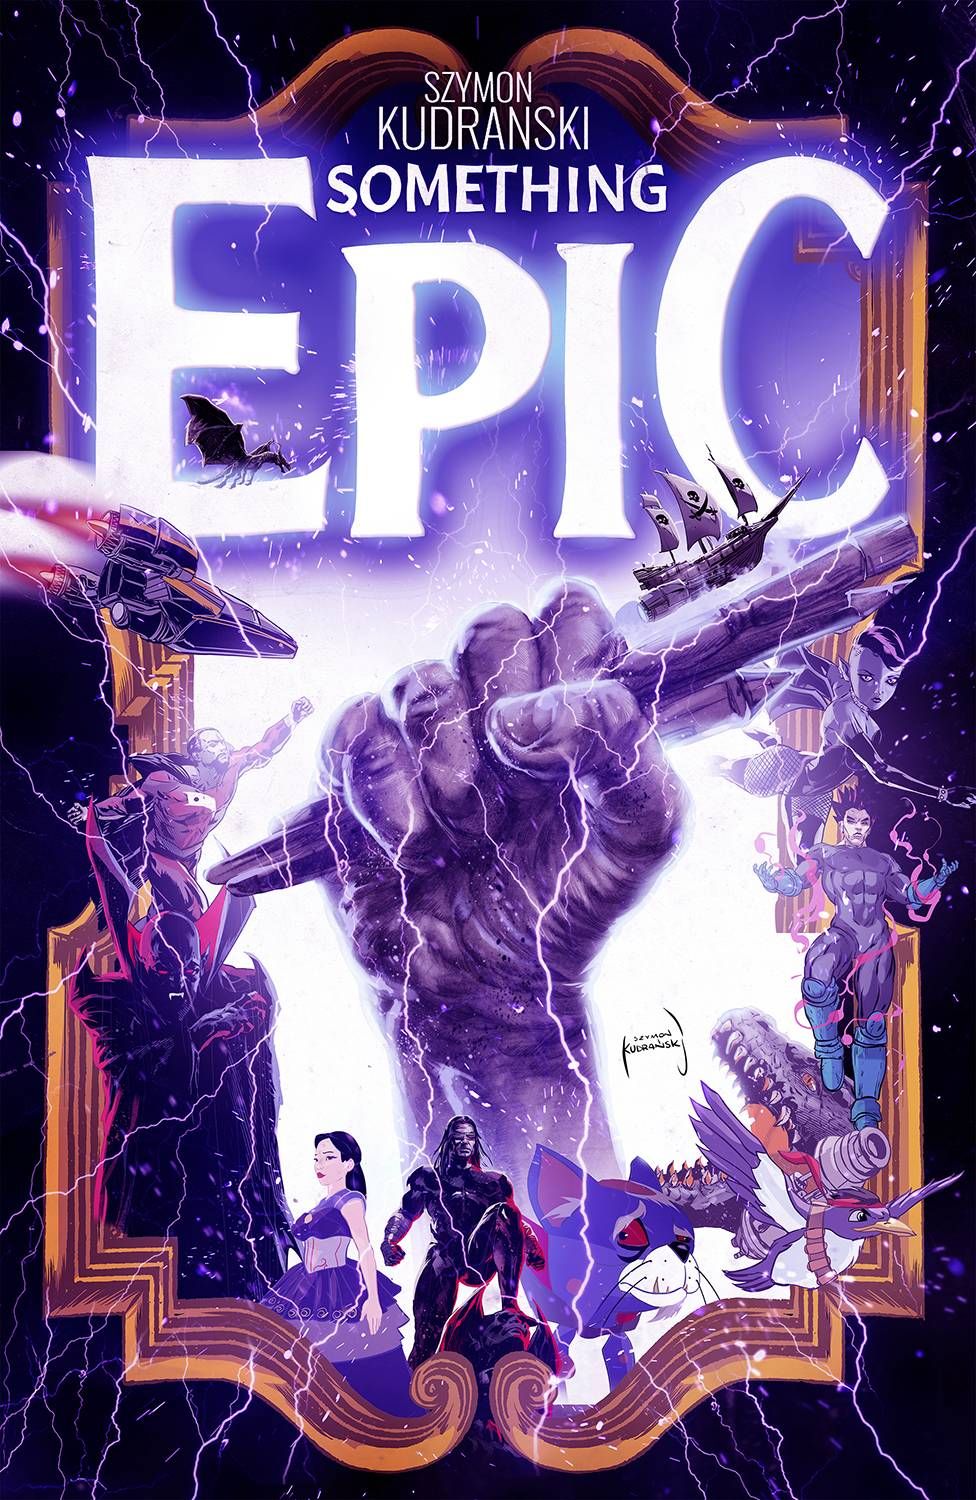 Something Epic #1 Cover with a variety of iconic comic book styles, spaceships, and a hand clutching a pencil and paintbrush